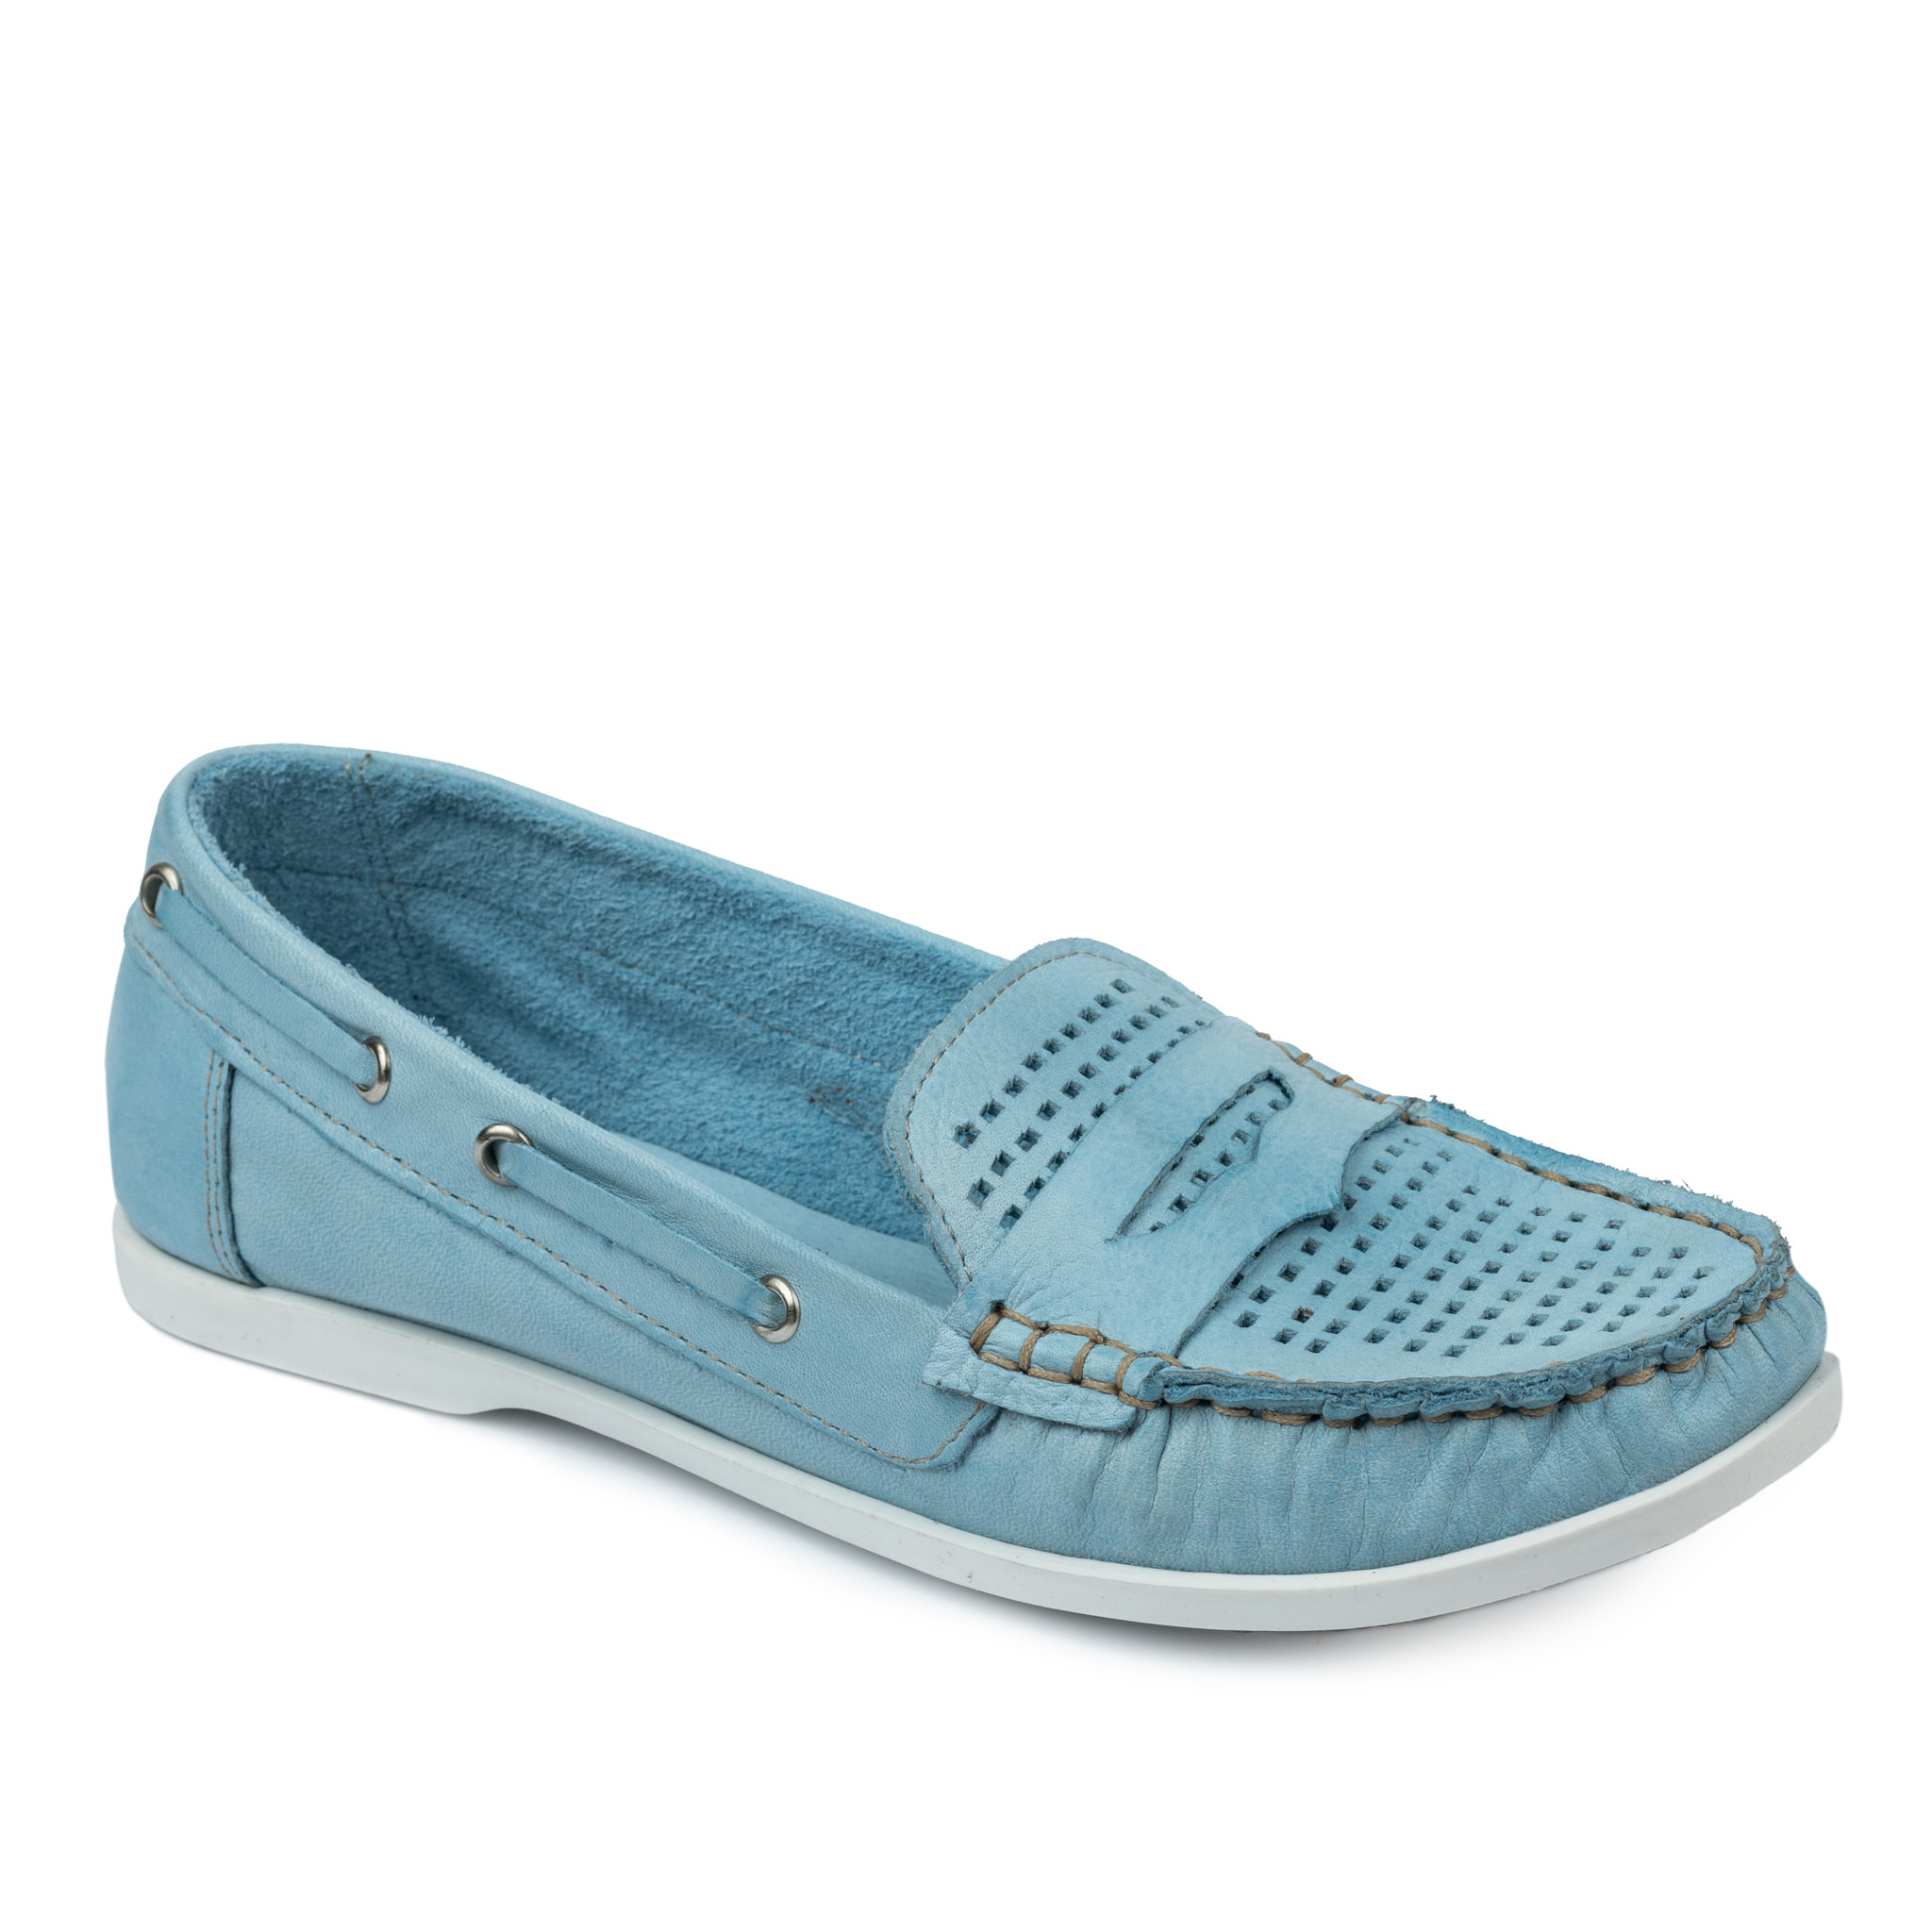 Leather moccasins A597 - BLUE